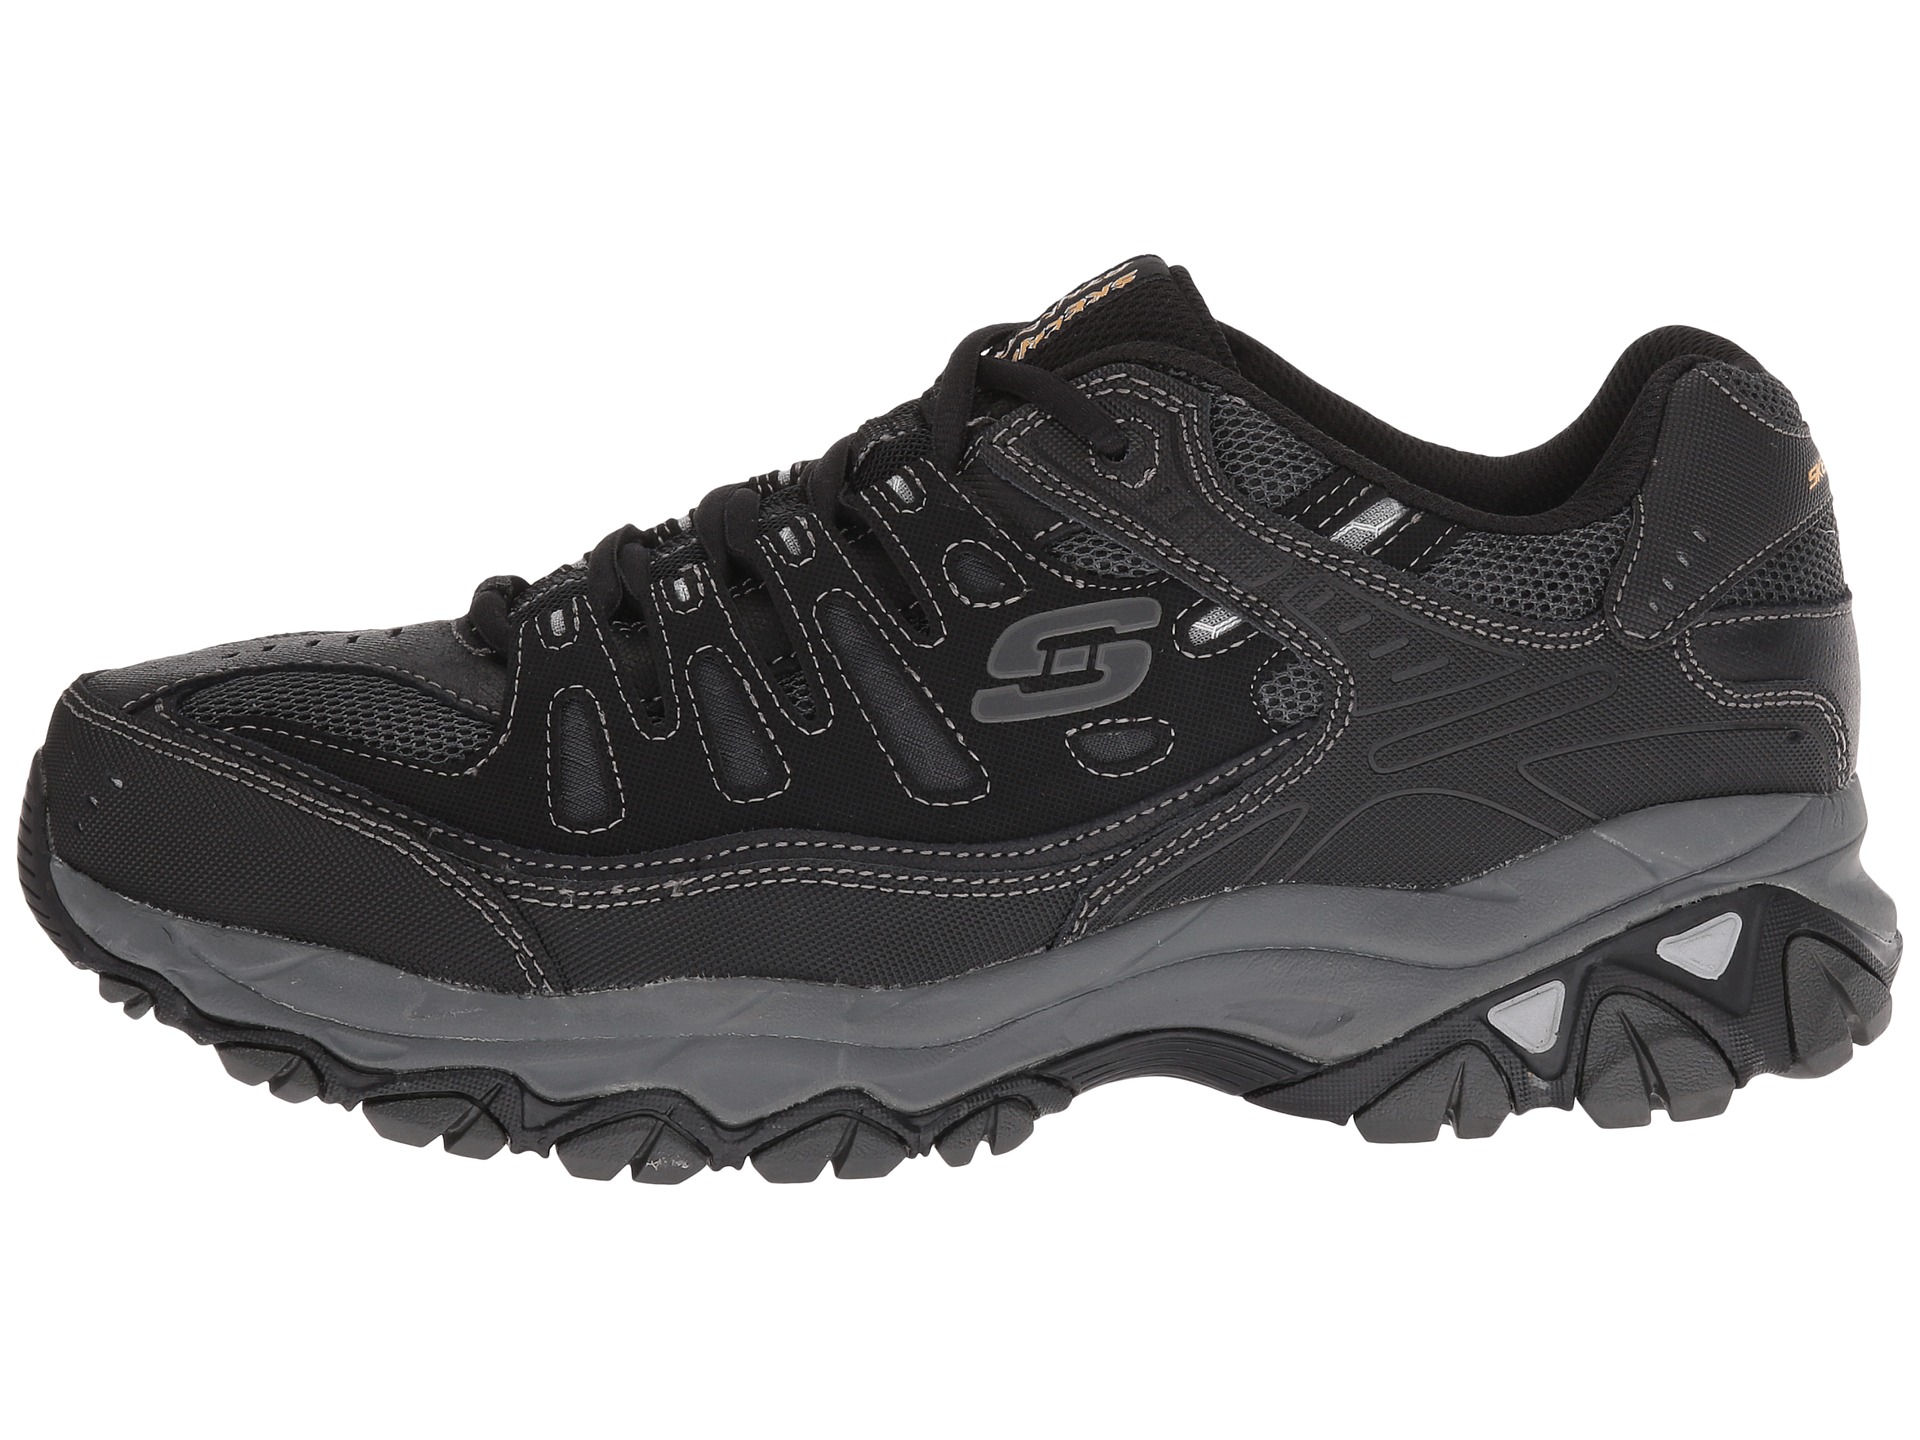 SKECHERS Afterburn M. Fit - Zappos.com Free Shipping BOTH Ways